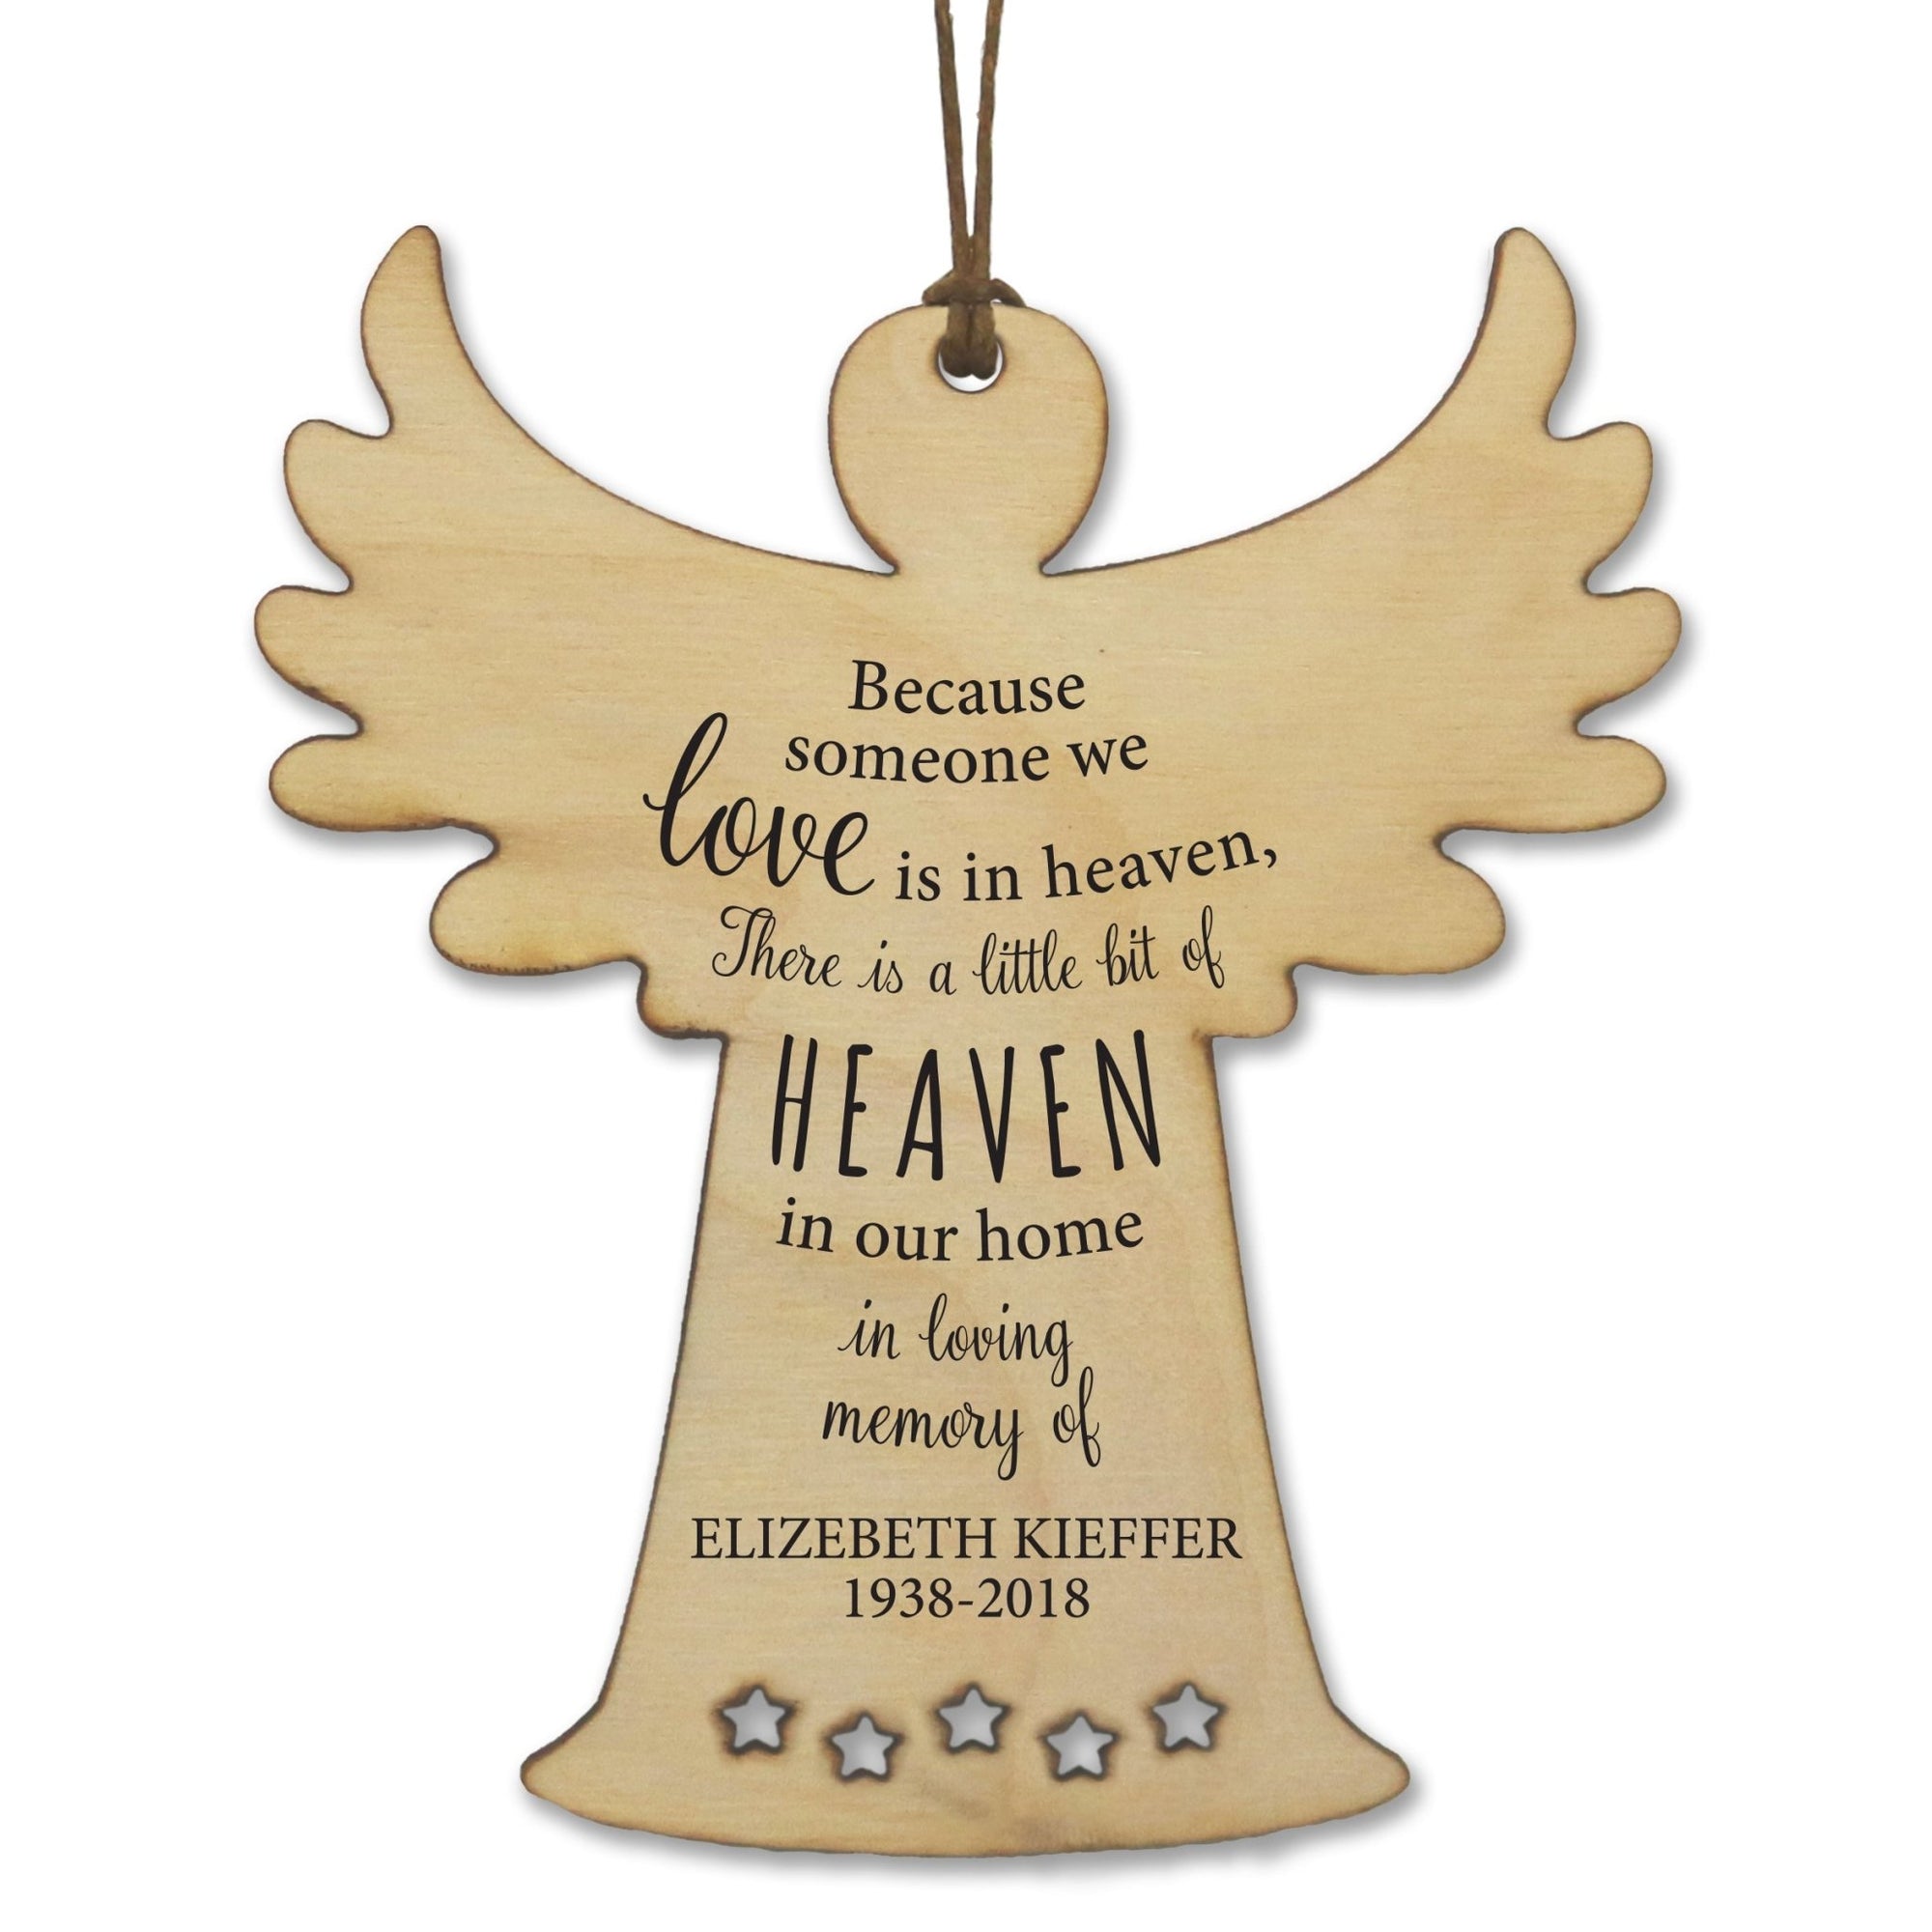 Custom Engraved Memorial Ornament for Loss of Loved One - Someone We Loved Most - LifeSong Milestones